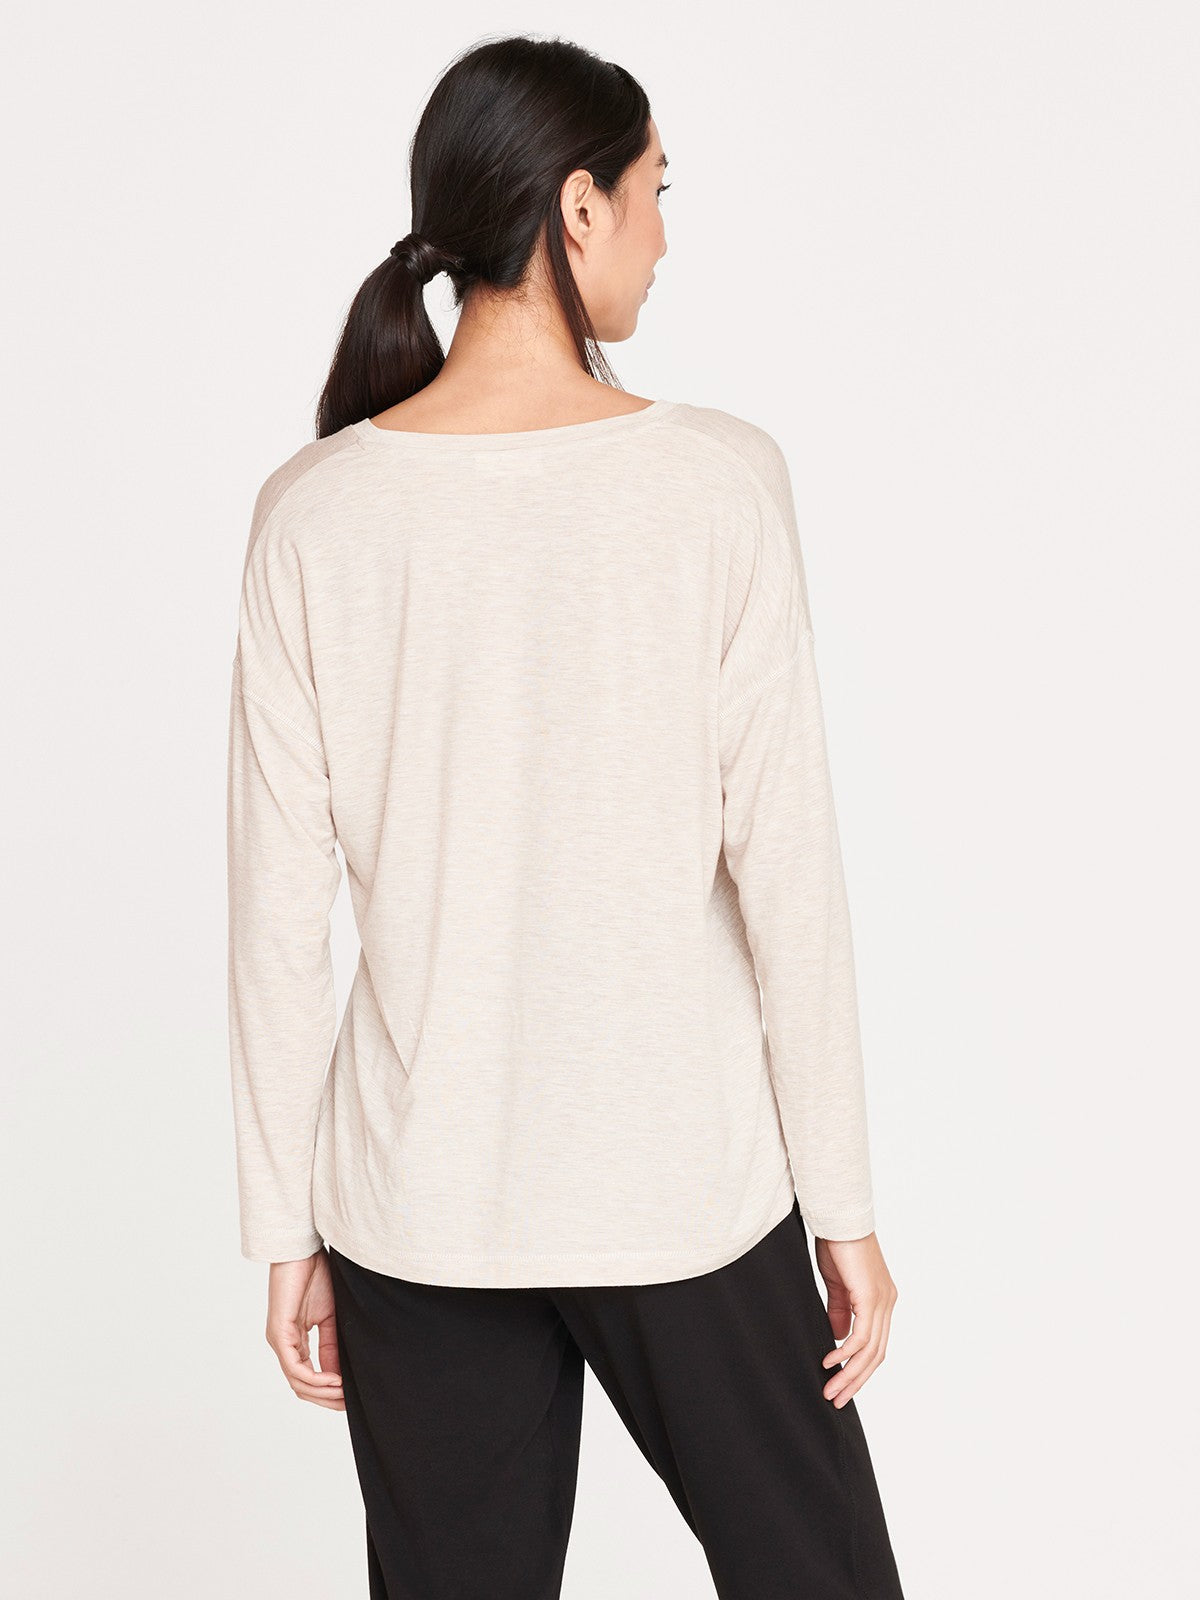 Naturally Soft SeaCell™ Long Sleeve Top